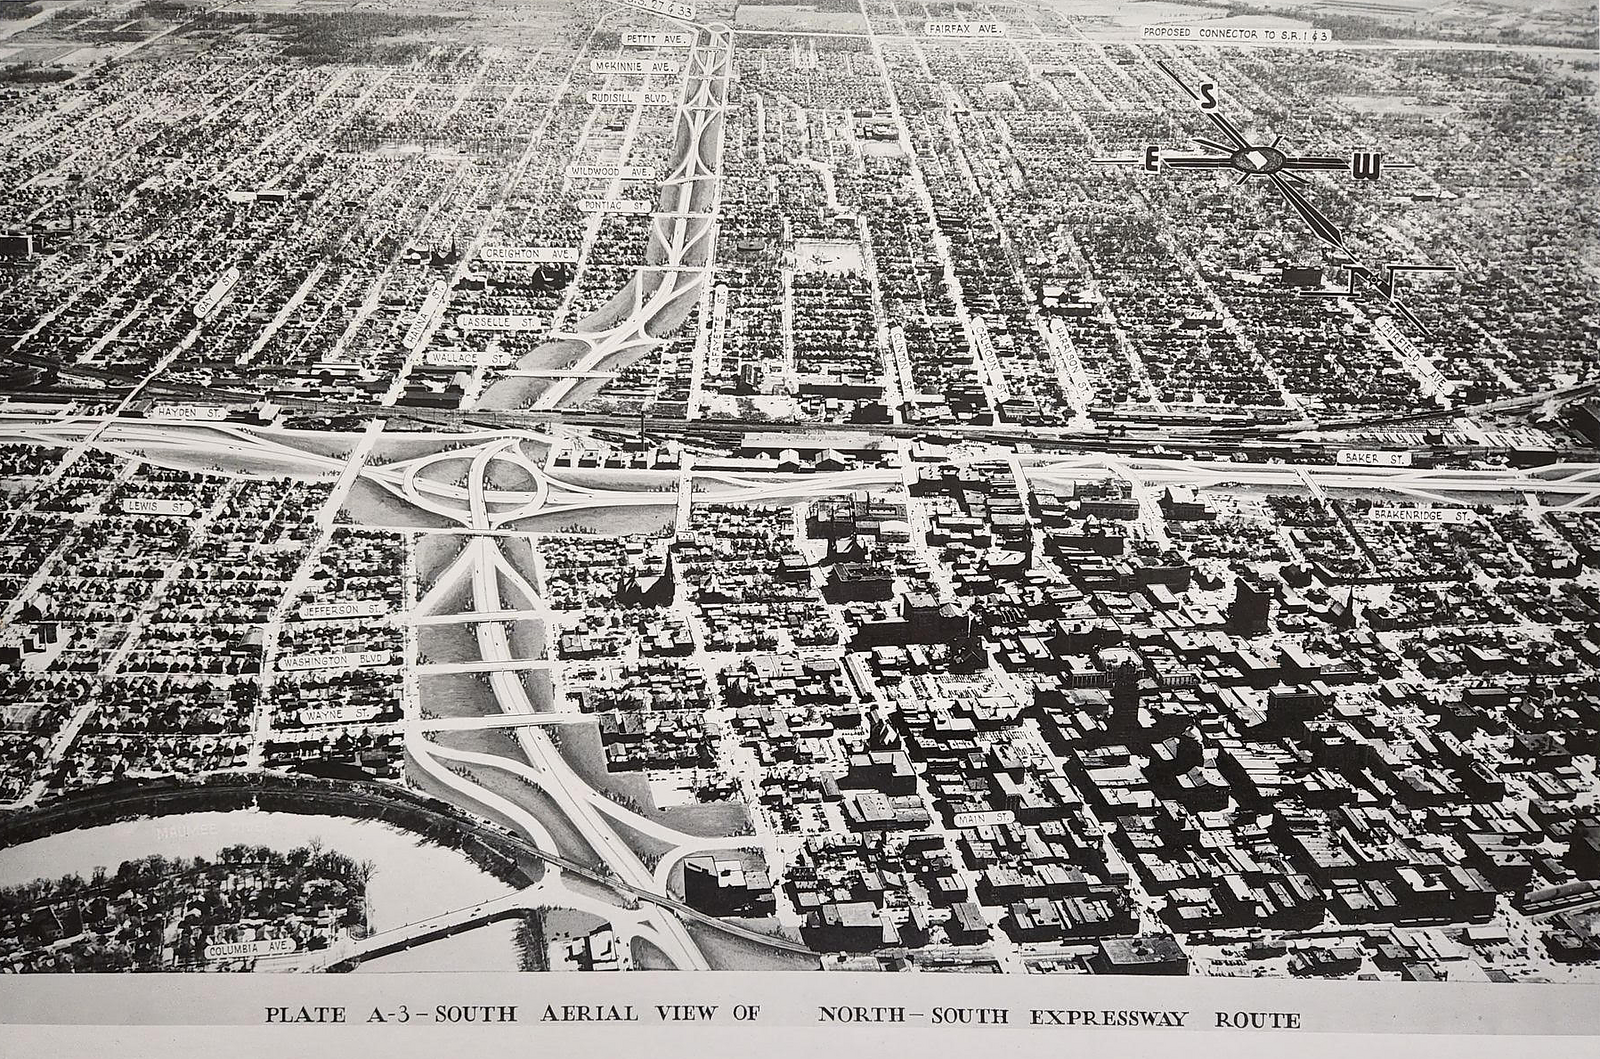 Plate A-1 - West Aerial View of East - West Expressway Route